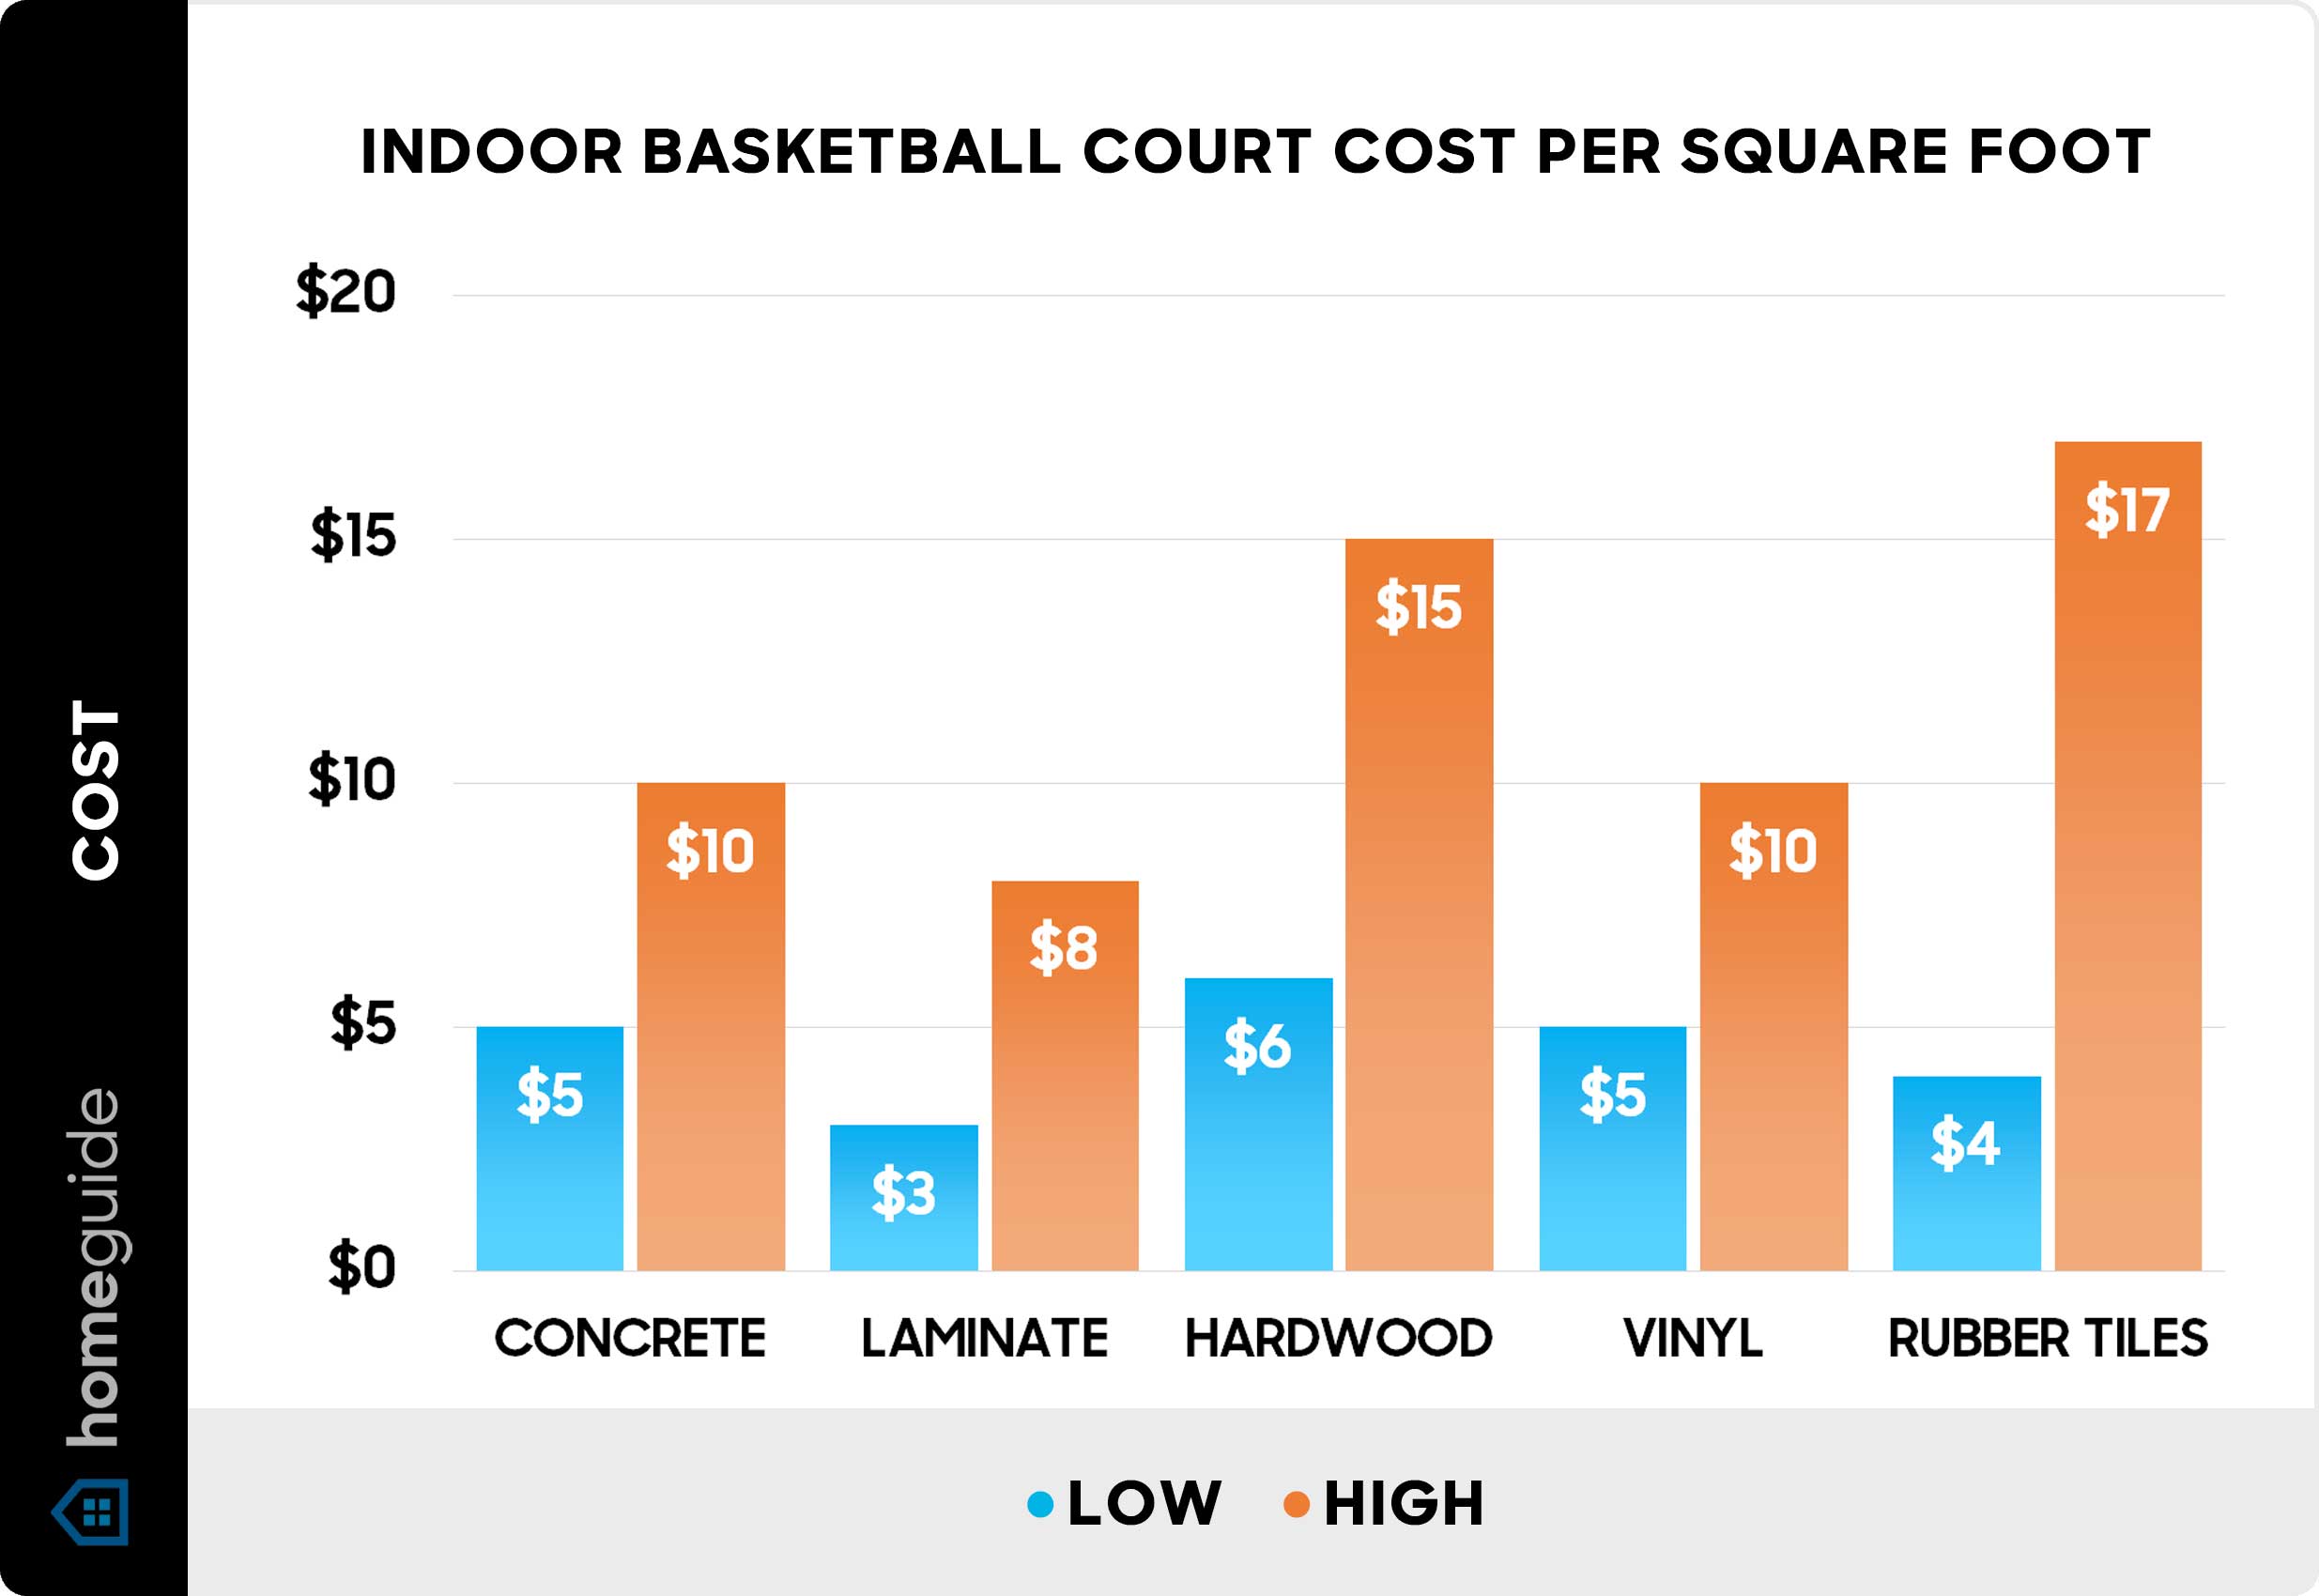 How Much Does Basketball Cost to Play?